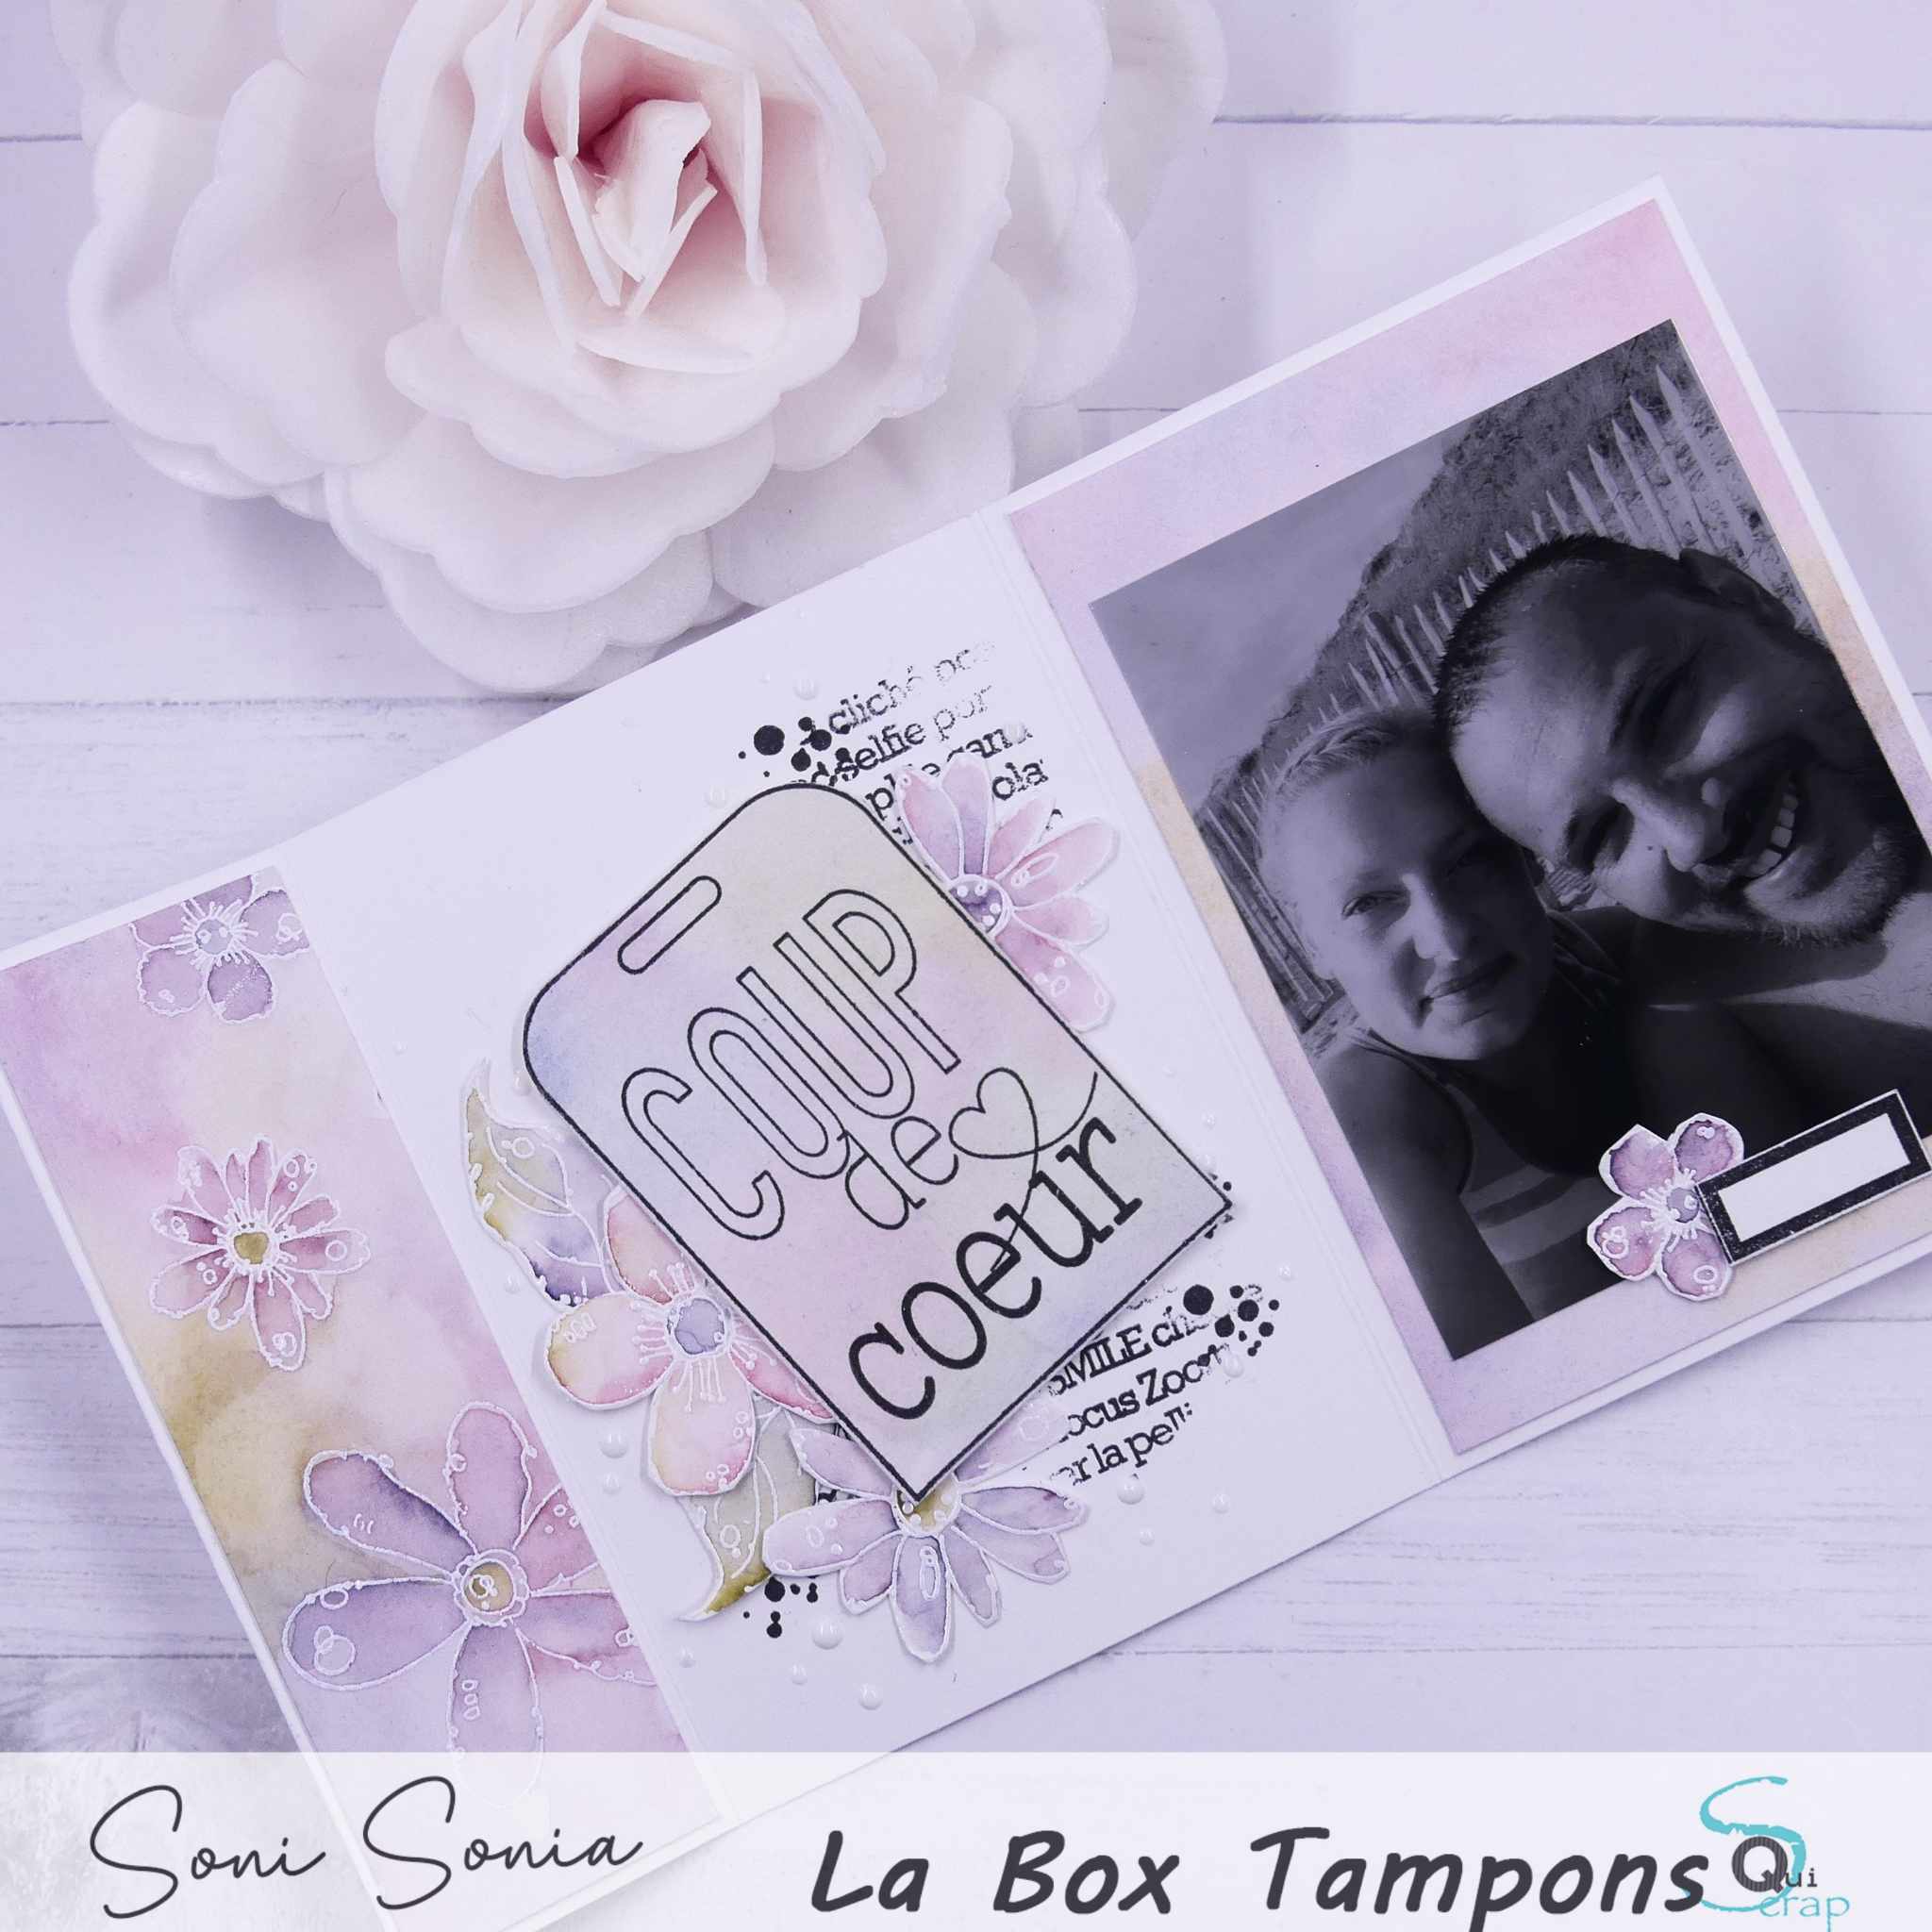 You are currently viewing Illustration pastelle de la Box tampons par Soni Sonia